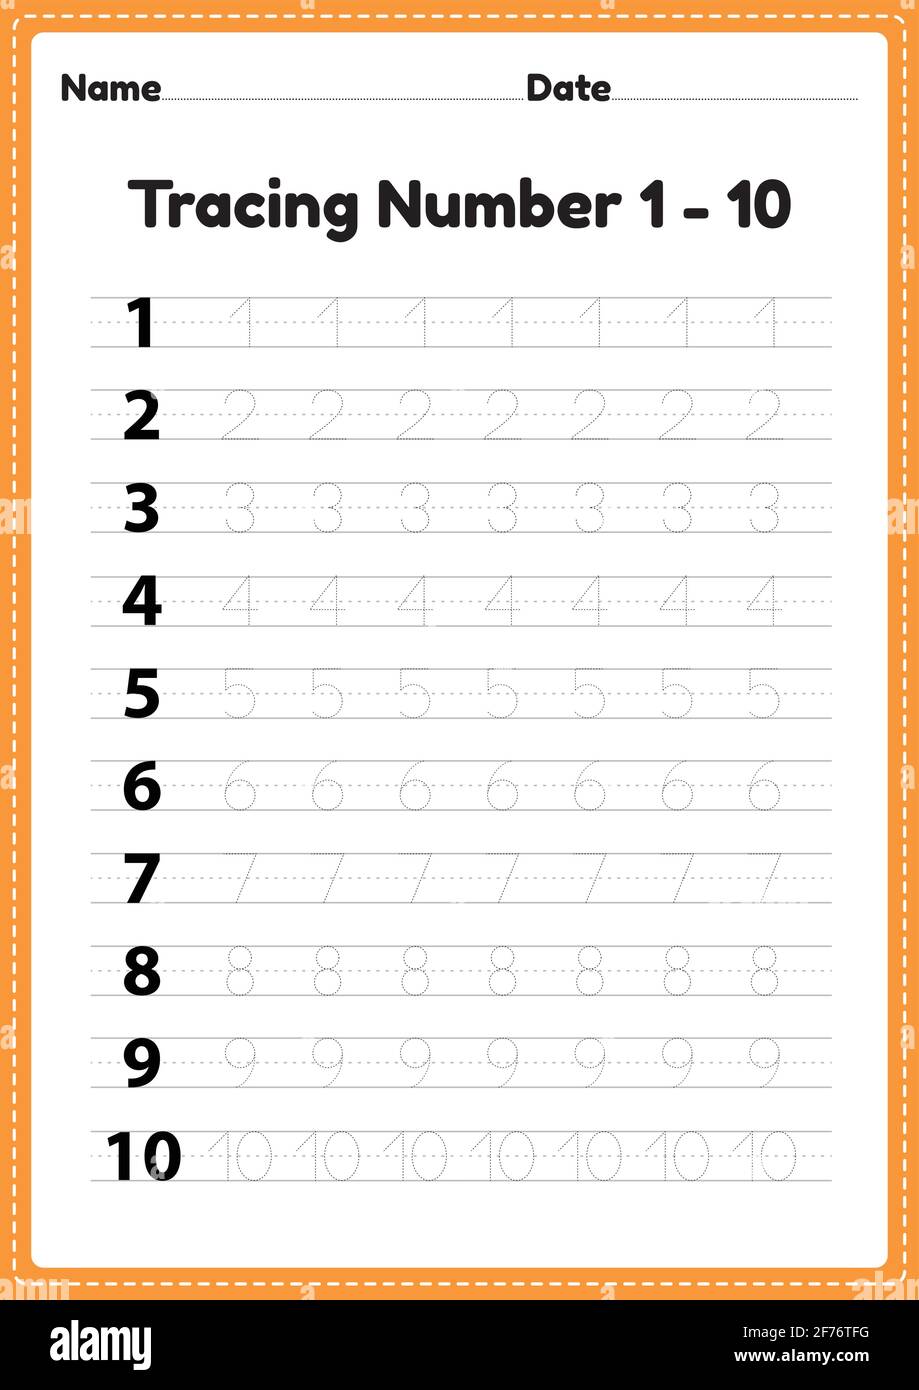 Tracing number 1-10 worksheet for kindergarten and preschool kids for educational handwriting practice in a printable page. Stock Vector